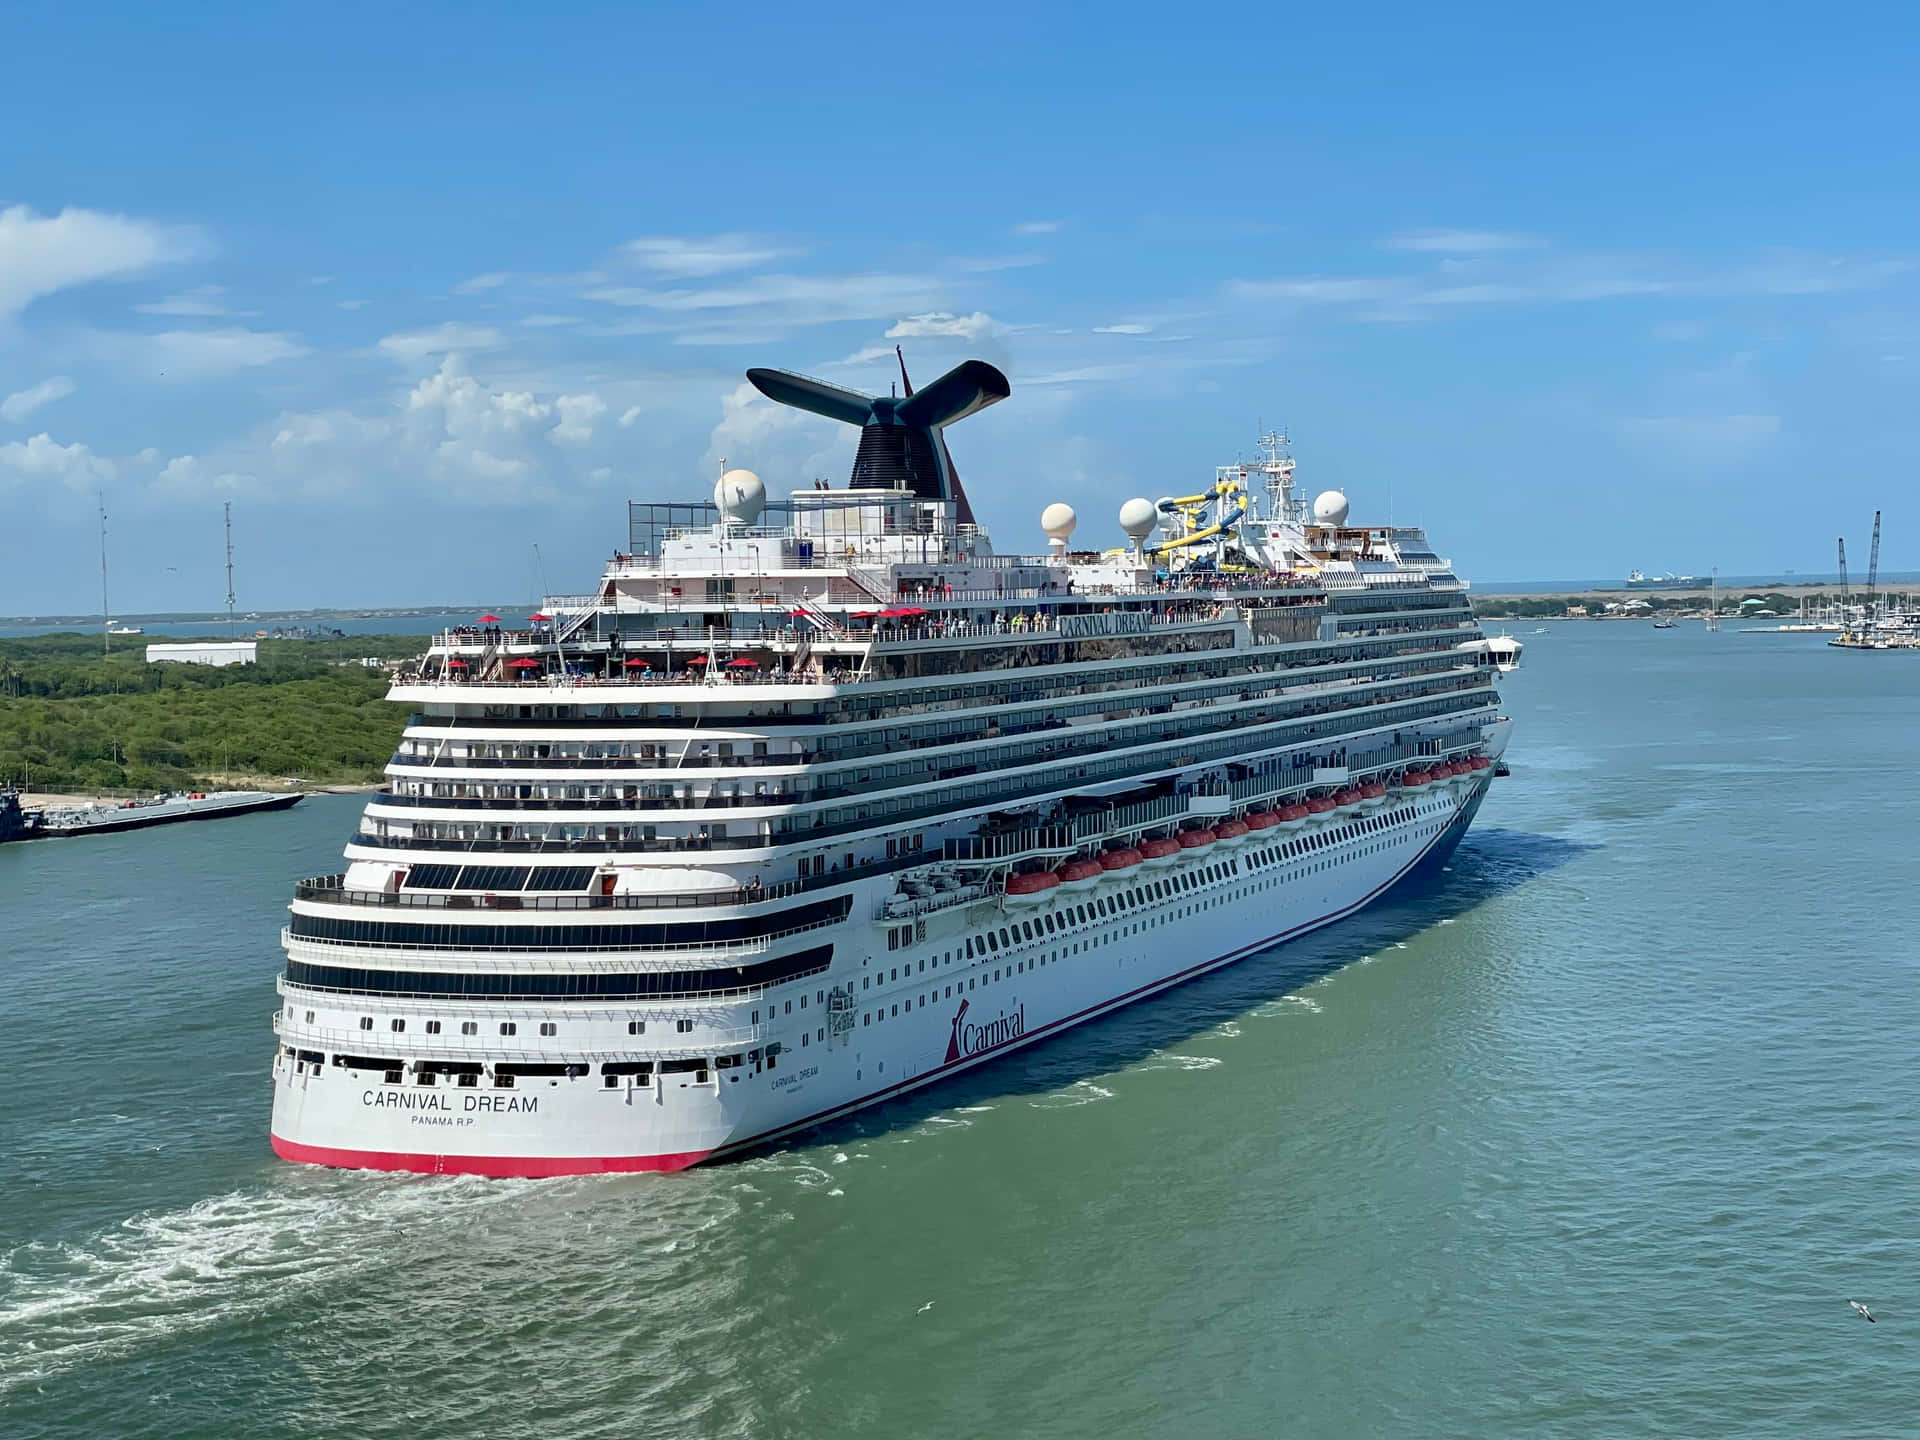 Enjoy a luxurious and majestic Carnival Dream cruise